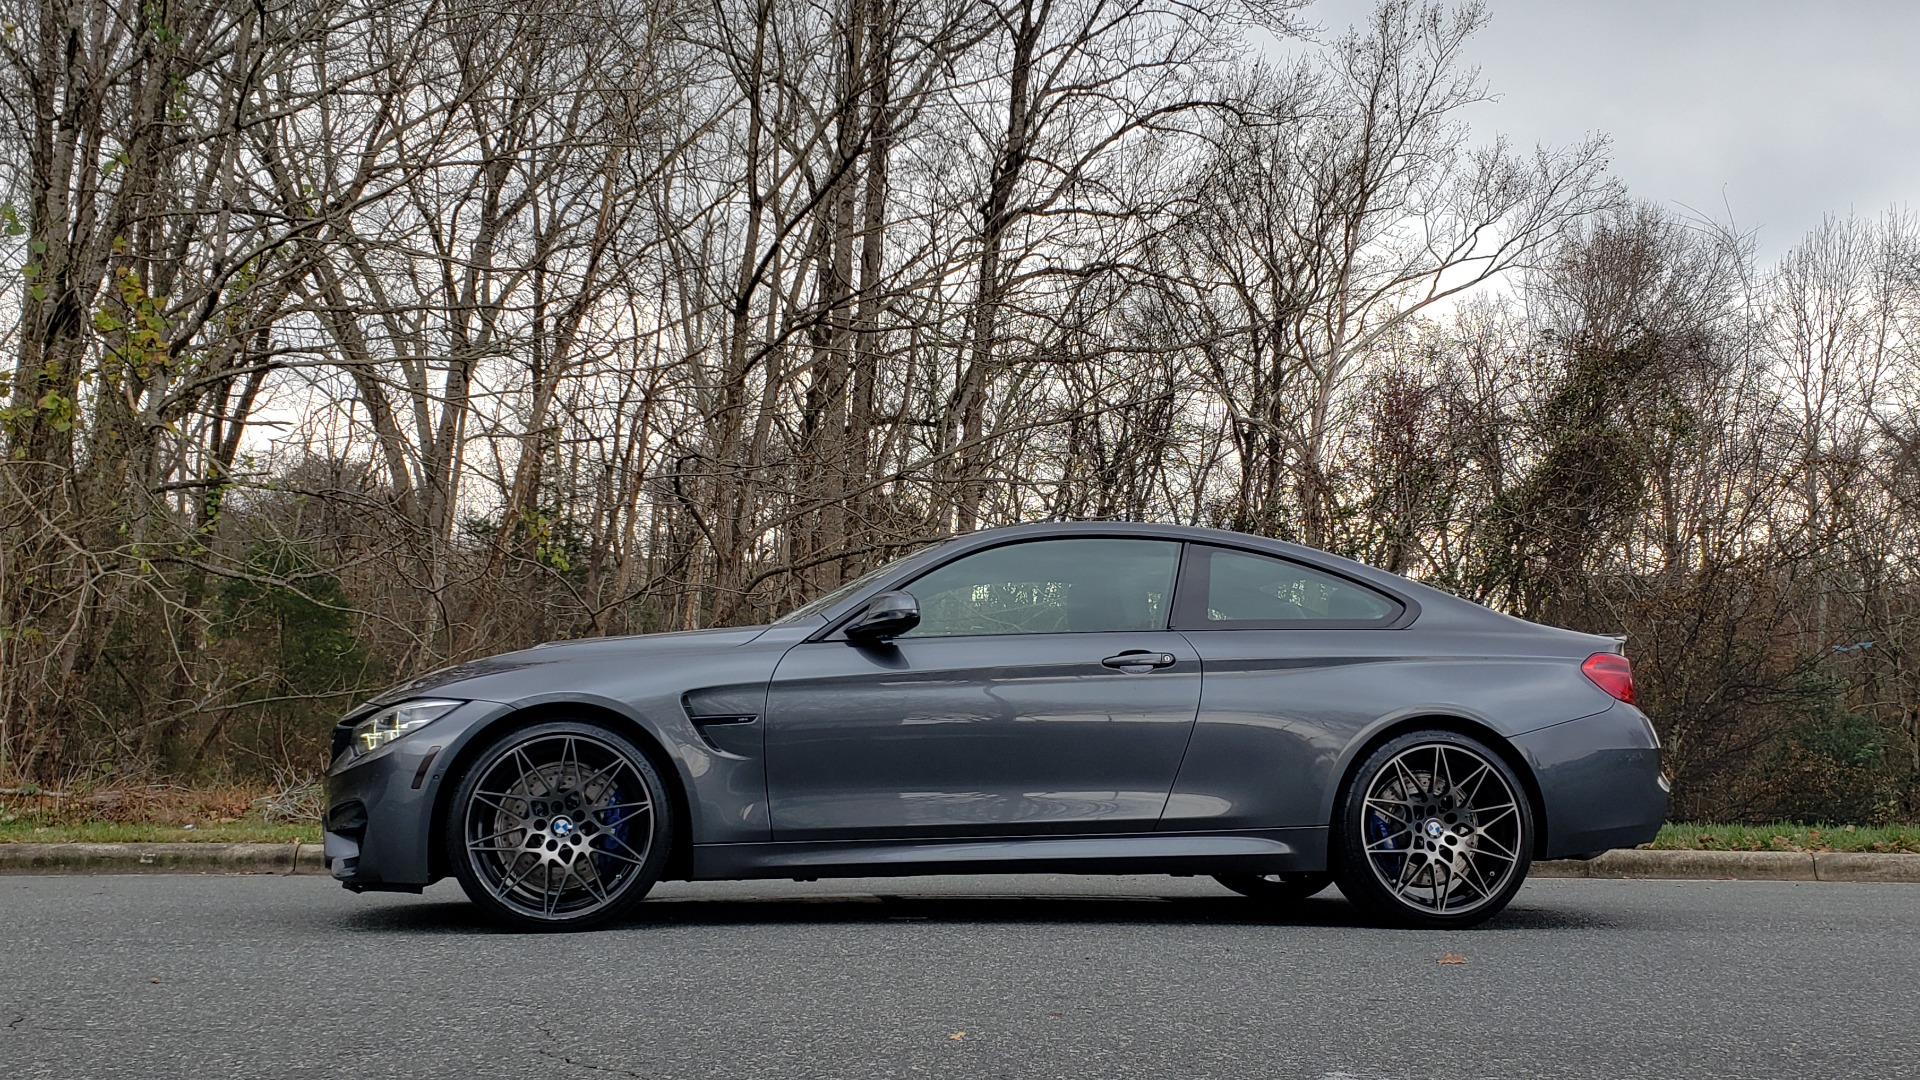 Used 2018 BMW M4 M-COMP / EXEC PKG / 7-SPD DBL CLUTCH / NAV / REARVIEW for sale Sold at Formula Imports in Charlotte NC 28227 3